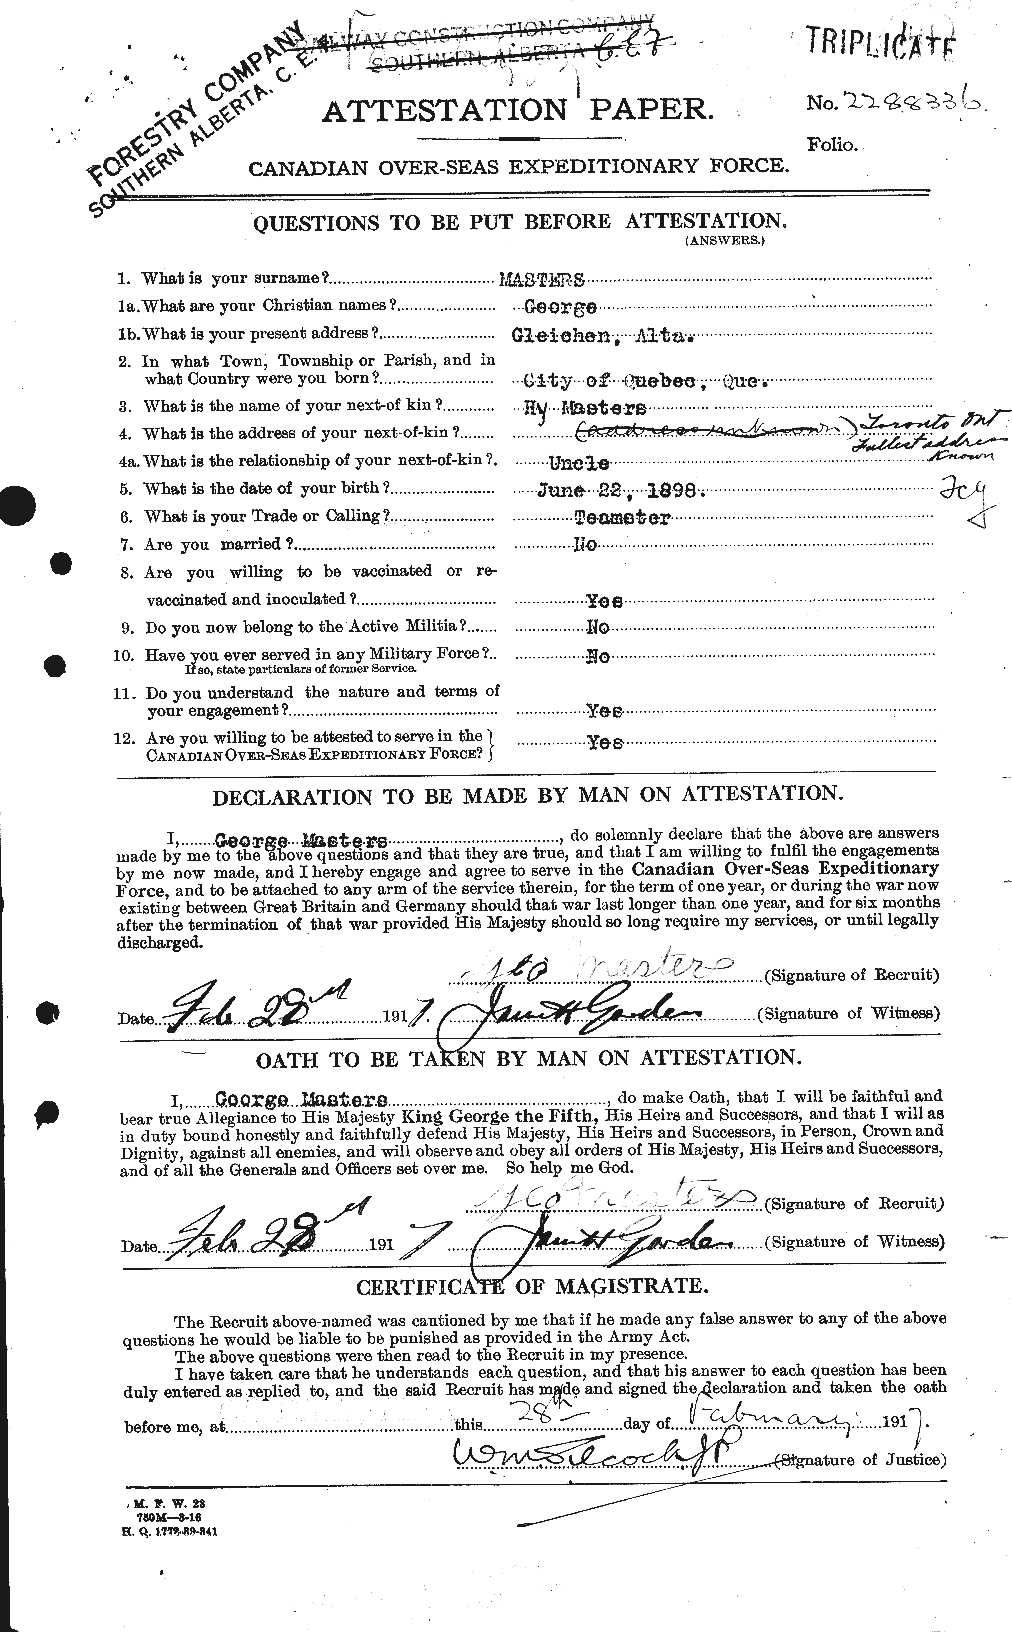 Personnel Records of the First World War - CEF 487326a